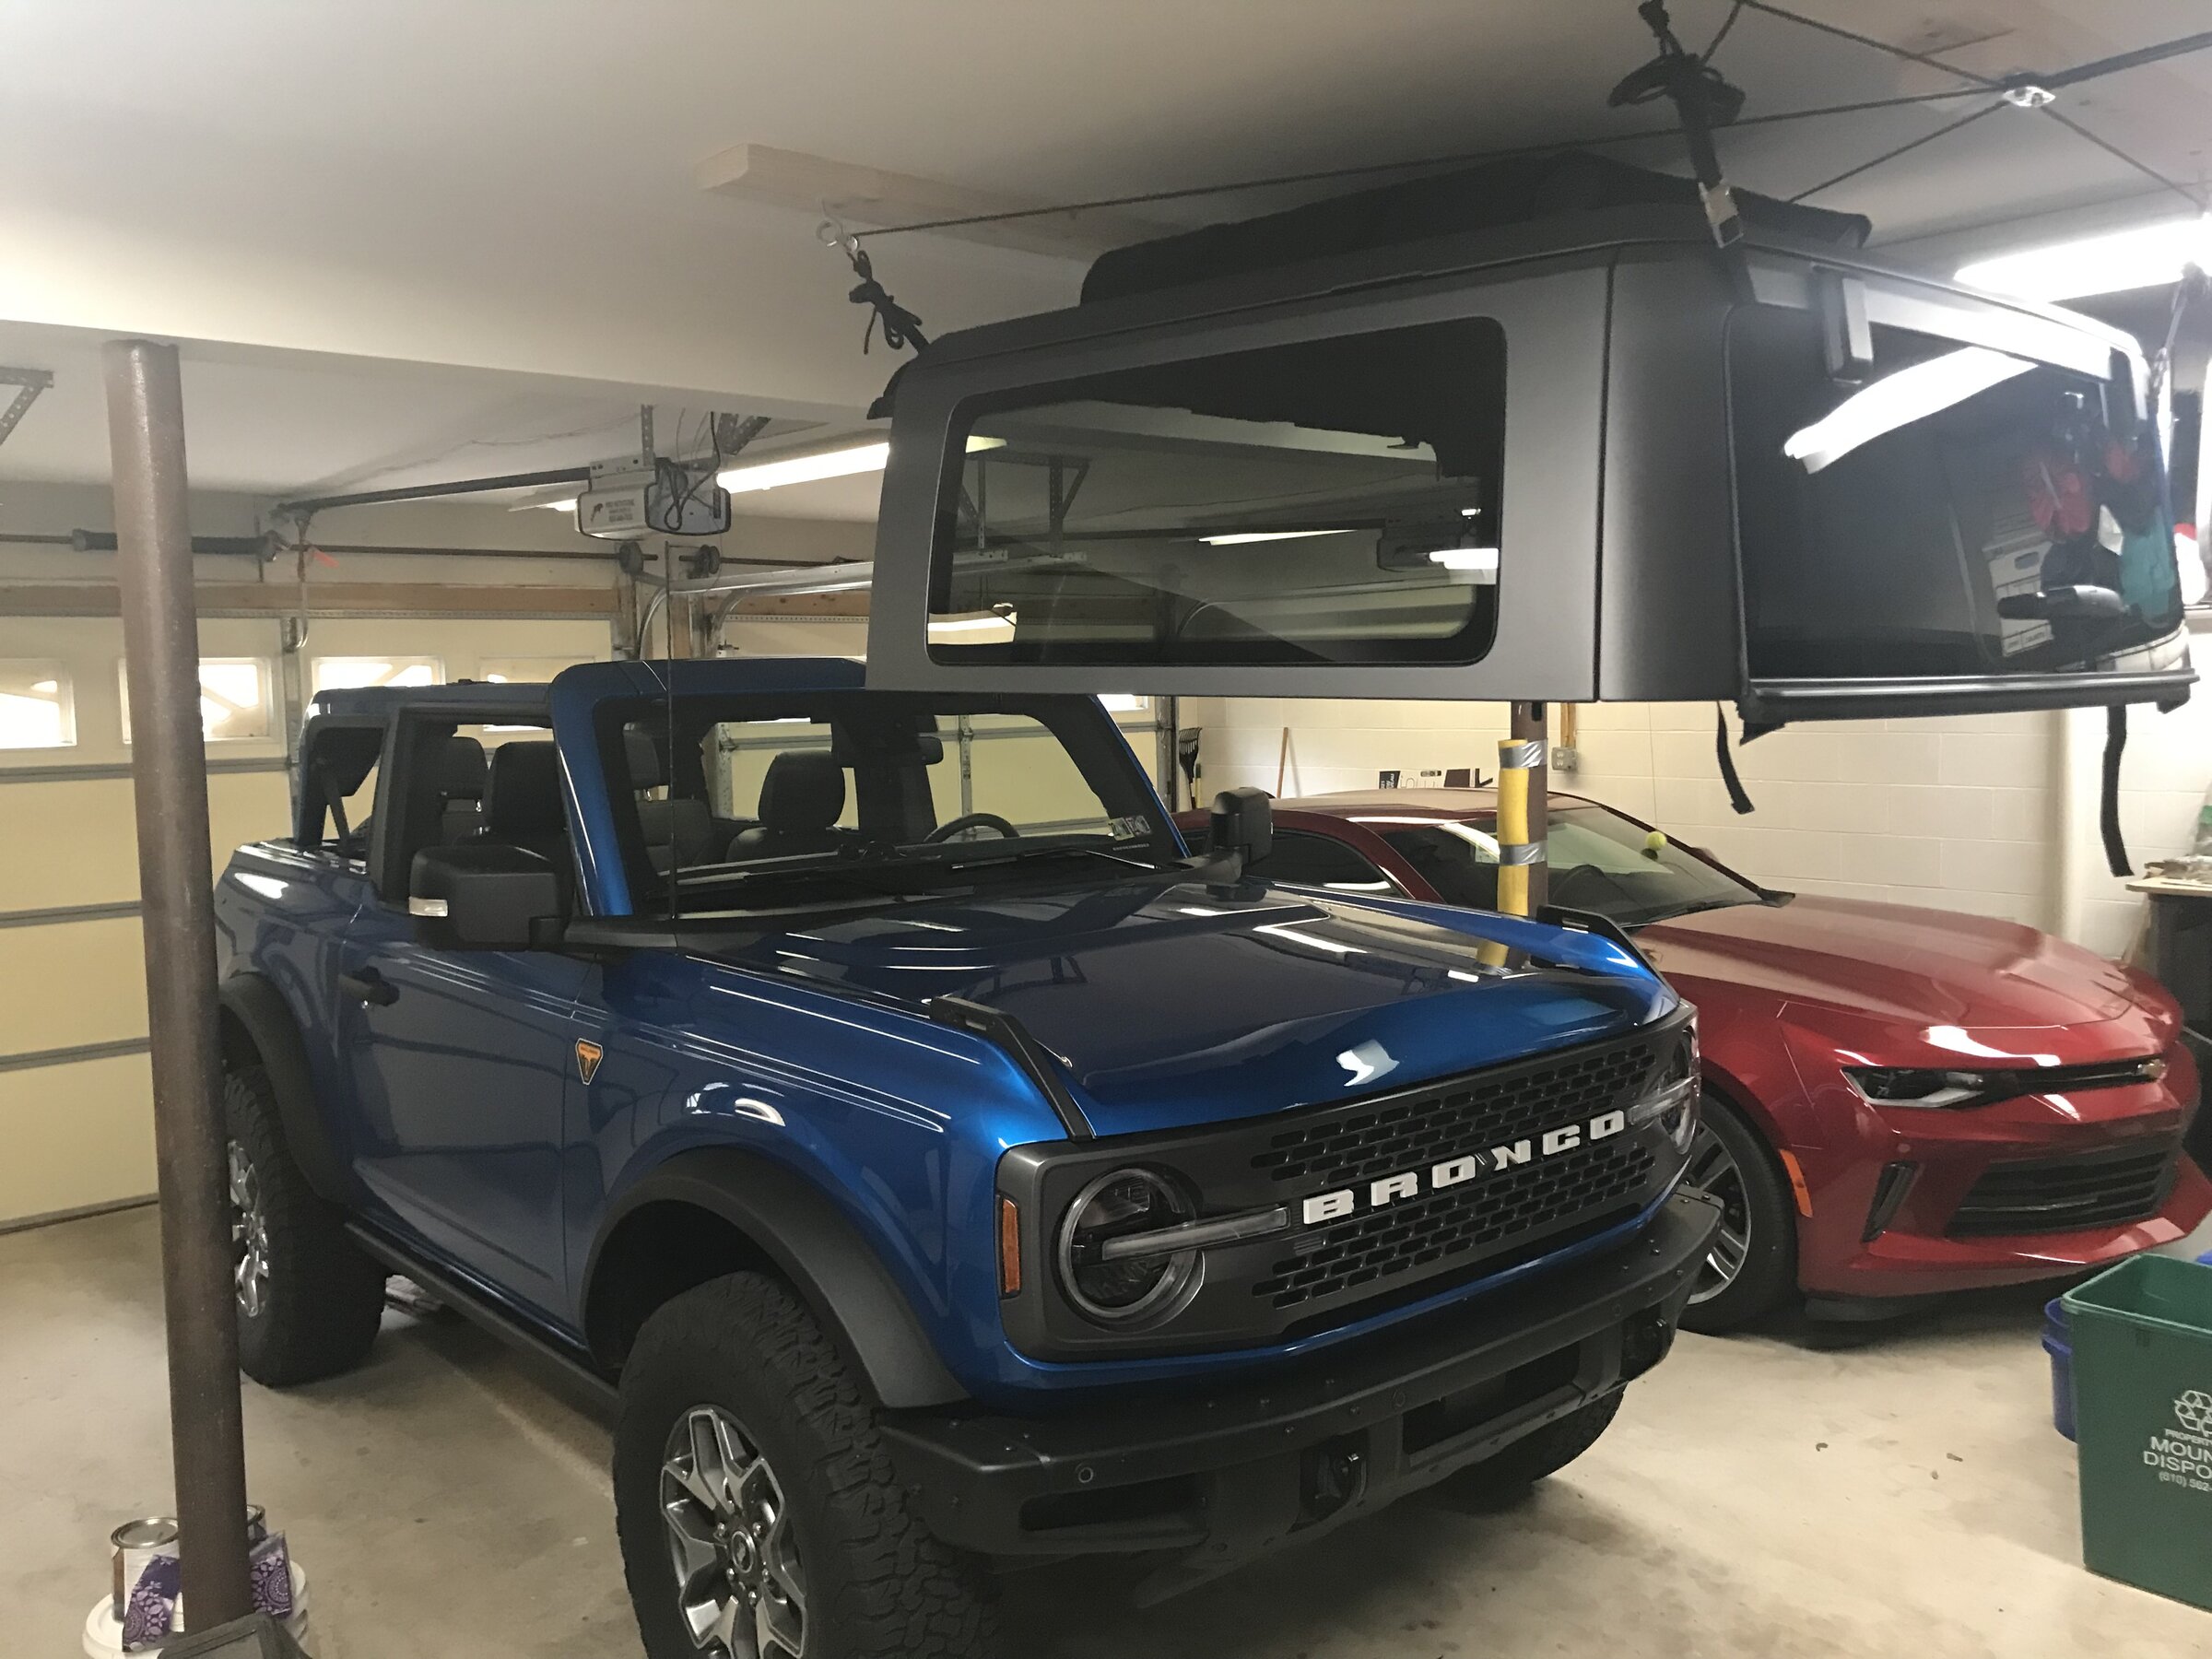 Ford Bronco Garage Hardtop Lift & Storage Installed (Bluetooth App Operated) IMG_4100